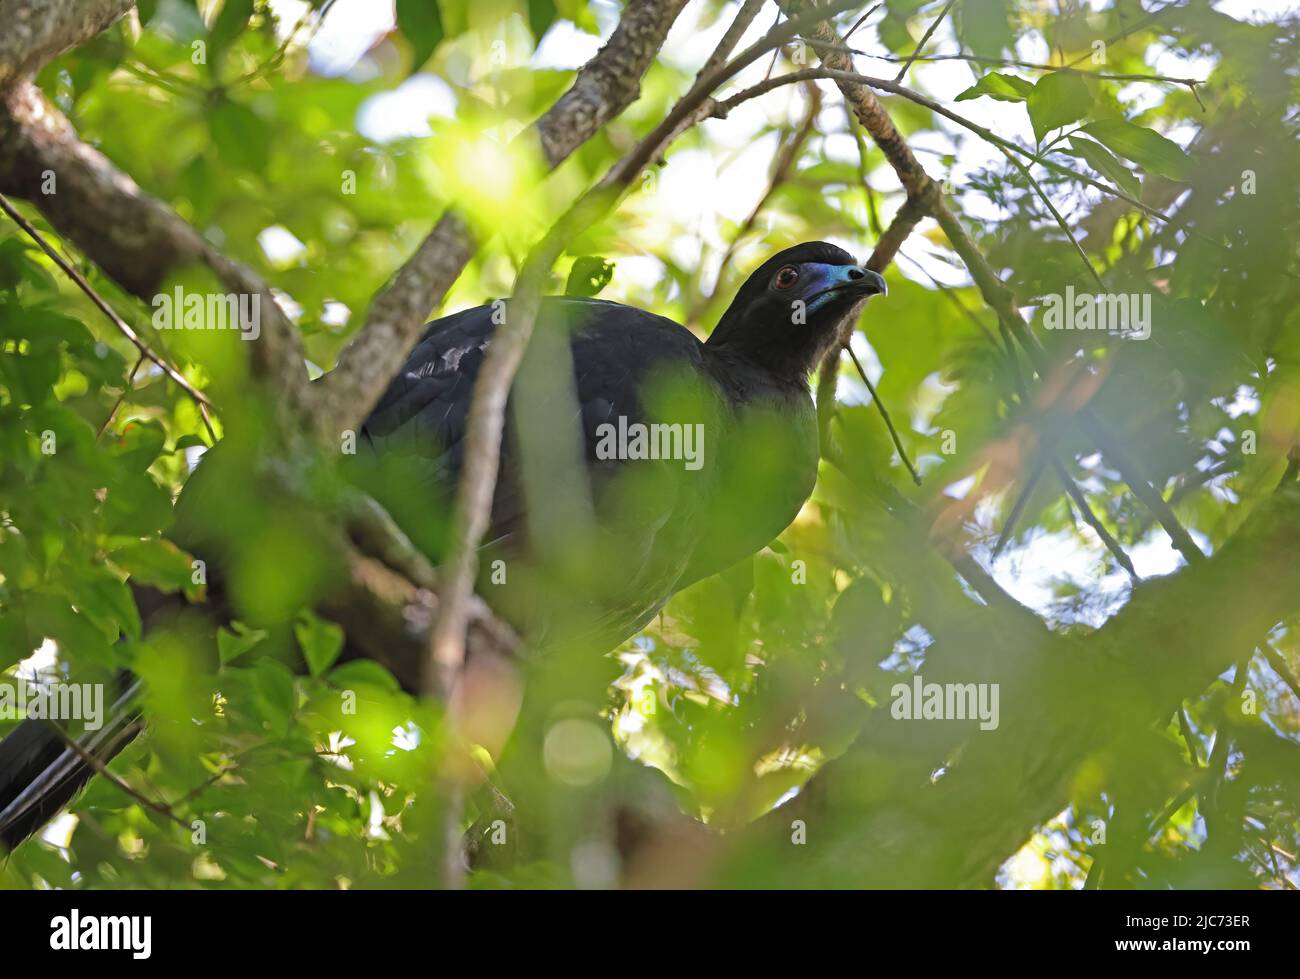 Black Guan (Chamaepetes unicolor) adult perched in tree             Monteverde, Costa Rica                   March Stock Photo